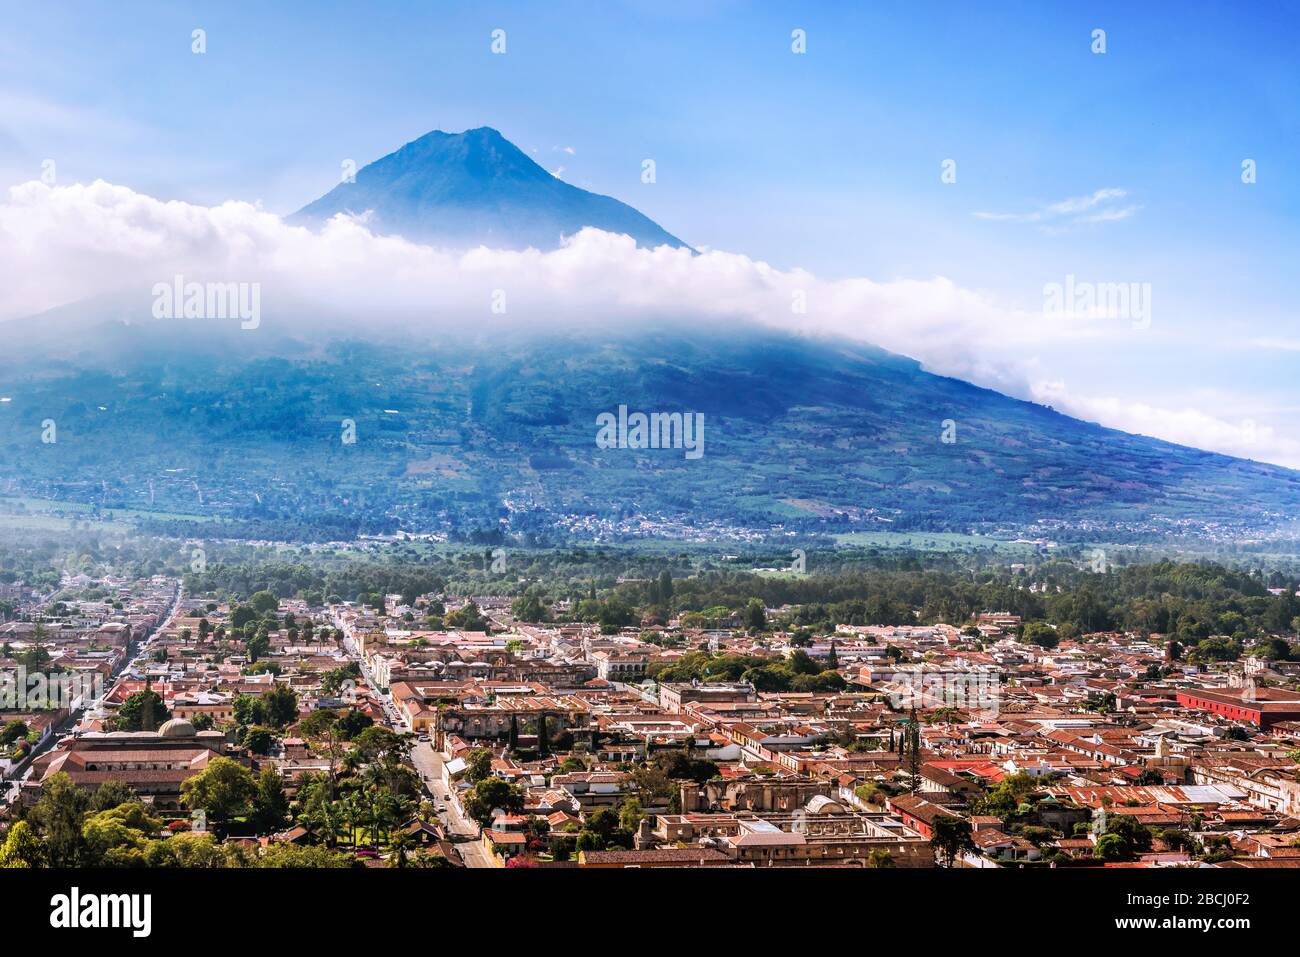 Aerialview of the city of Antigua and Volcano De Agua from Cerro de la Cruz, Guatemala. Antigua is former capital which was moved to Guatemala City af Stock Photo